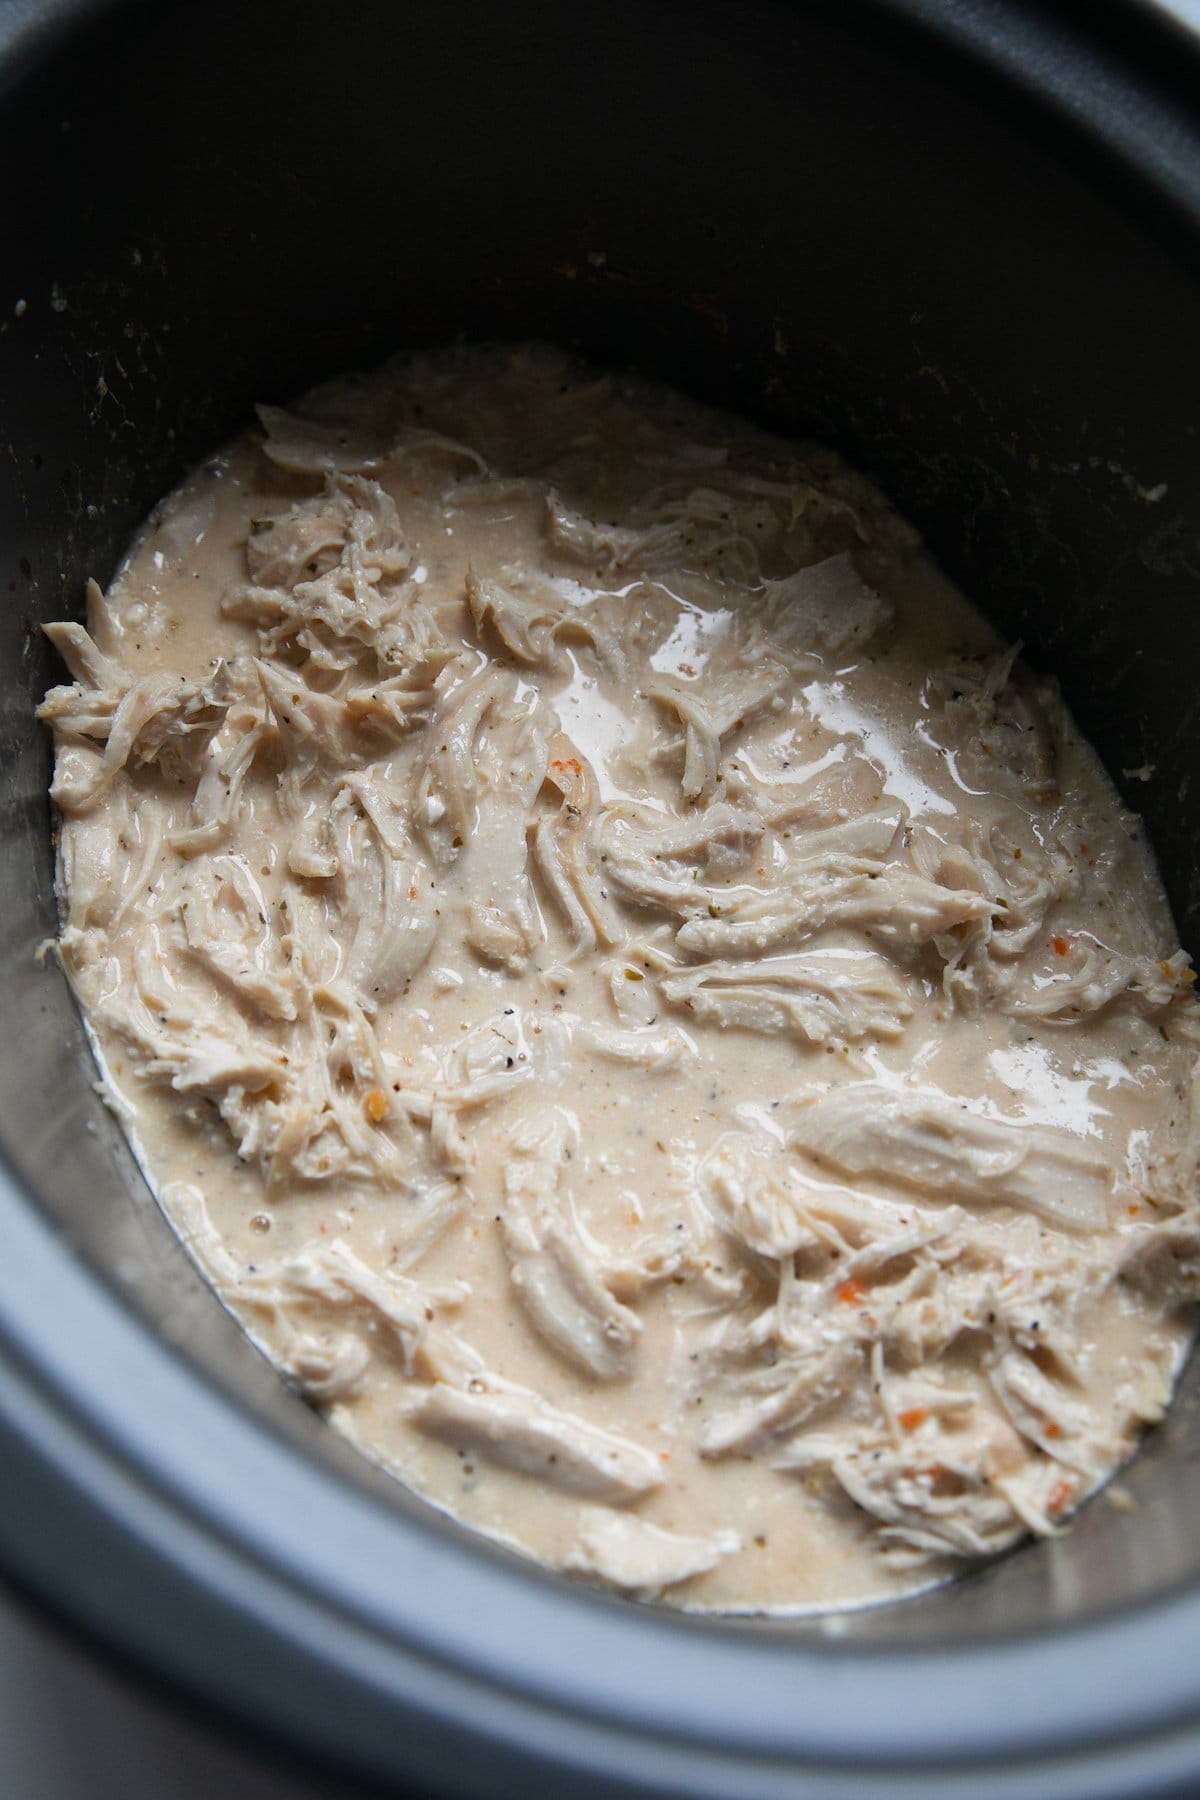 shredded and cooked chicken in sauce in crockpot